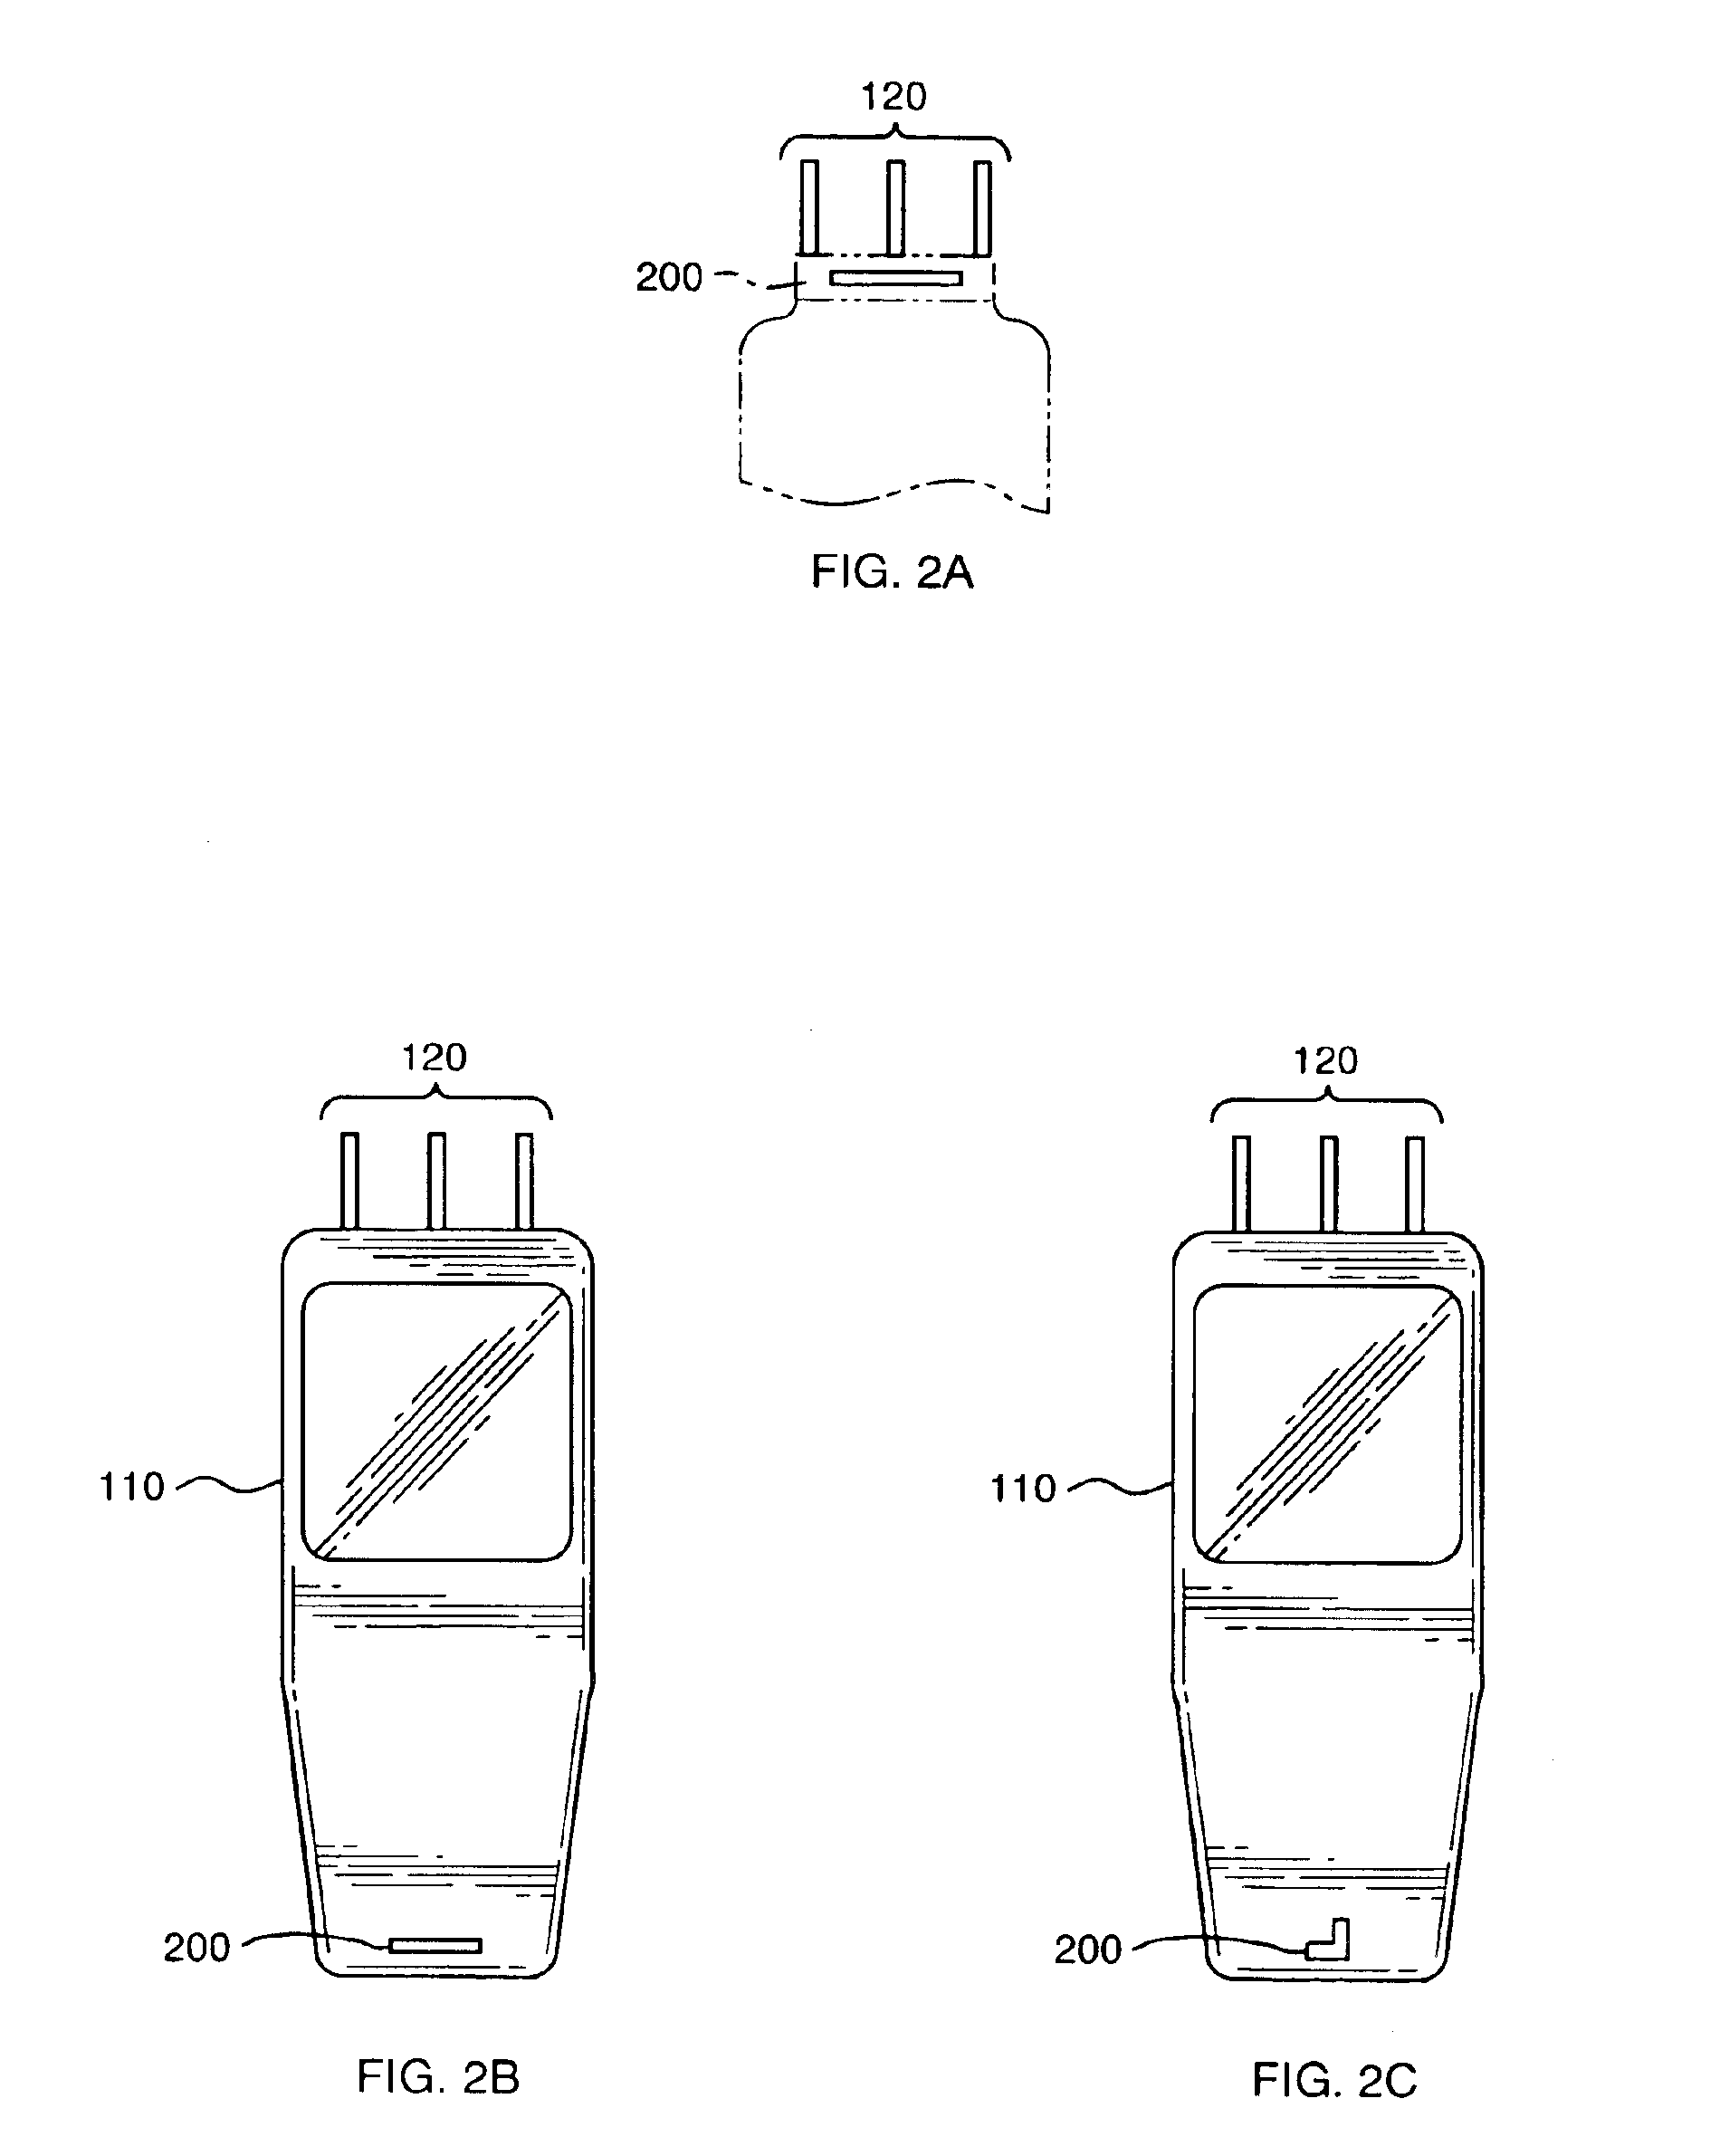 Adaptive receive and omnidirectional transmit antenna array